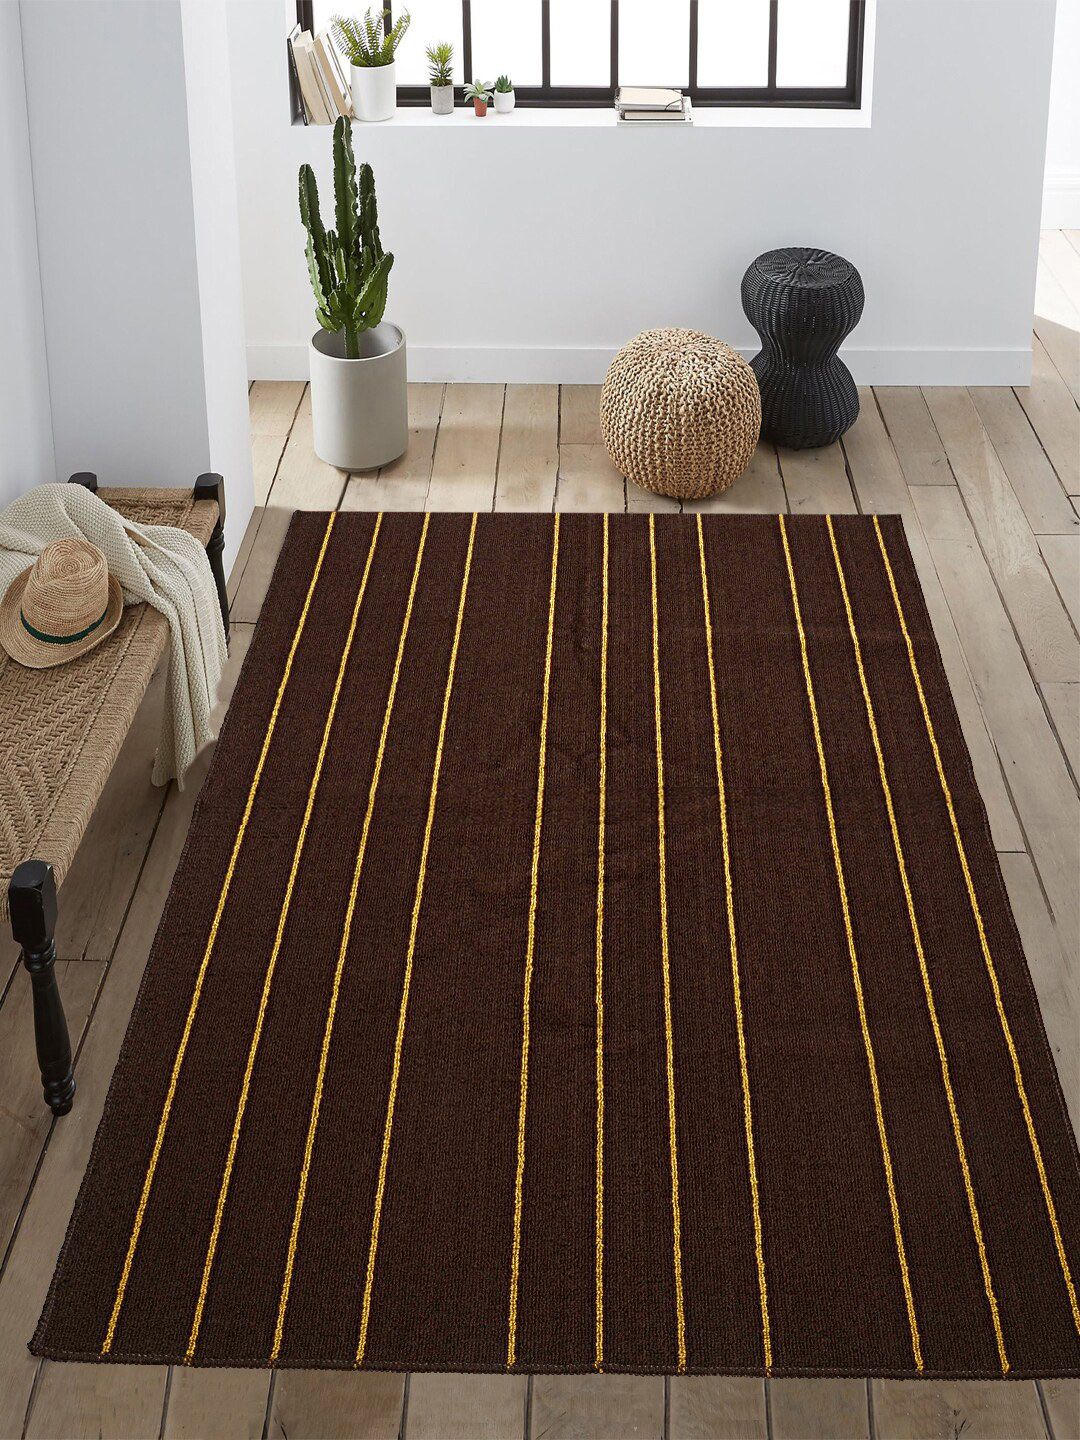 Saral Home Brown & Yellow Striped Carpet Price in India